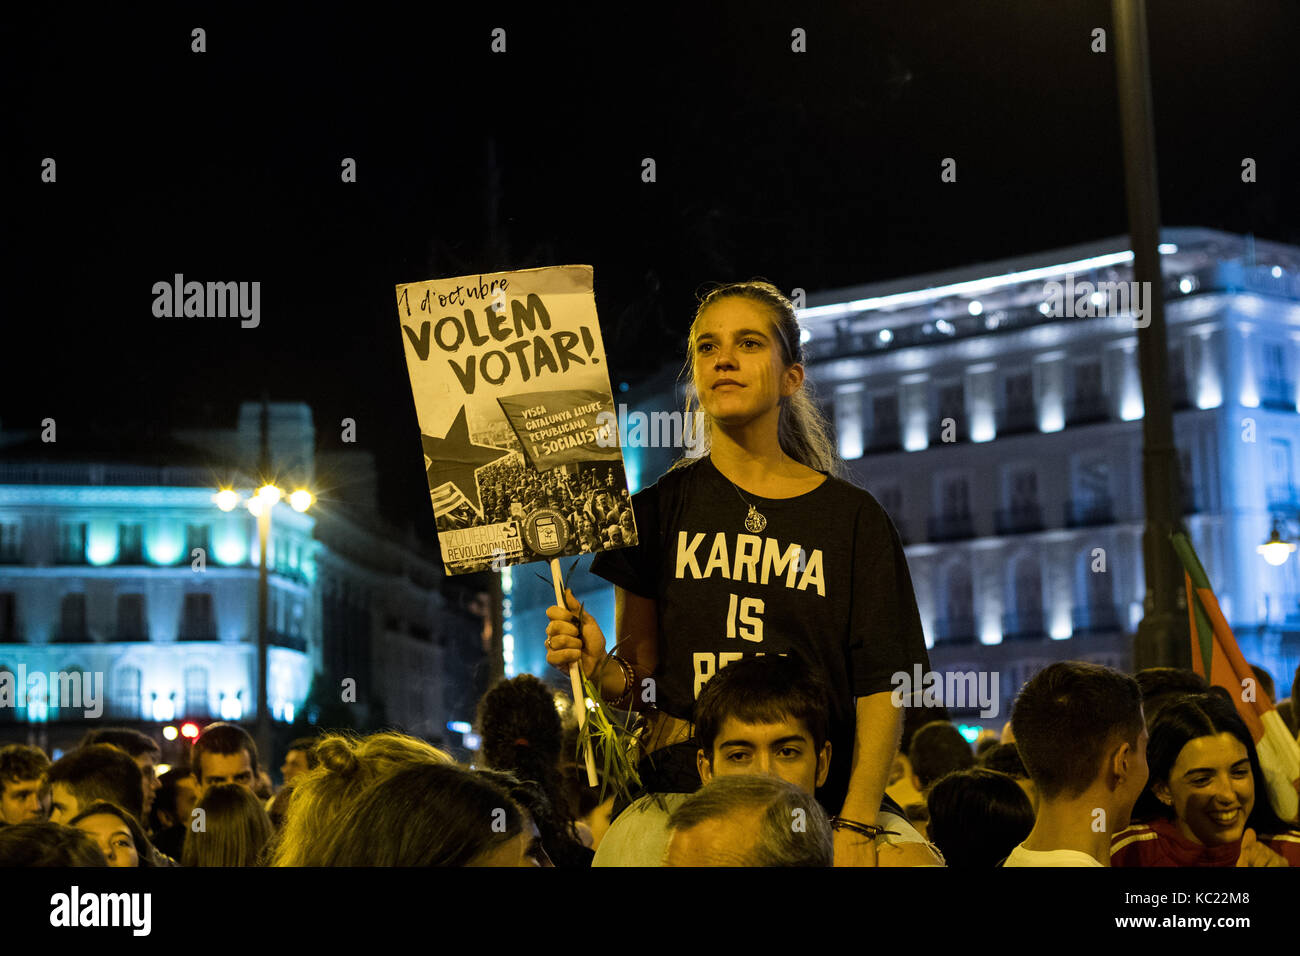 Madrid, Spain. 1st Oct. 2017. A woman holds a placard that reads 'We want to vote' during a protest supporting referendum in Catalonia. Madrid, Spain. Credit: Marcos del Mazo/Alamy Live News Stock Photo